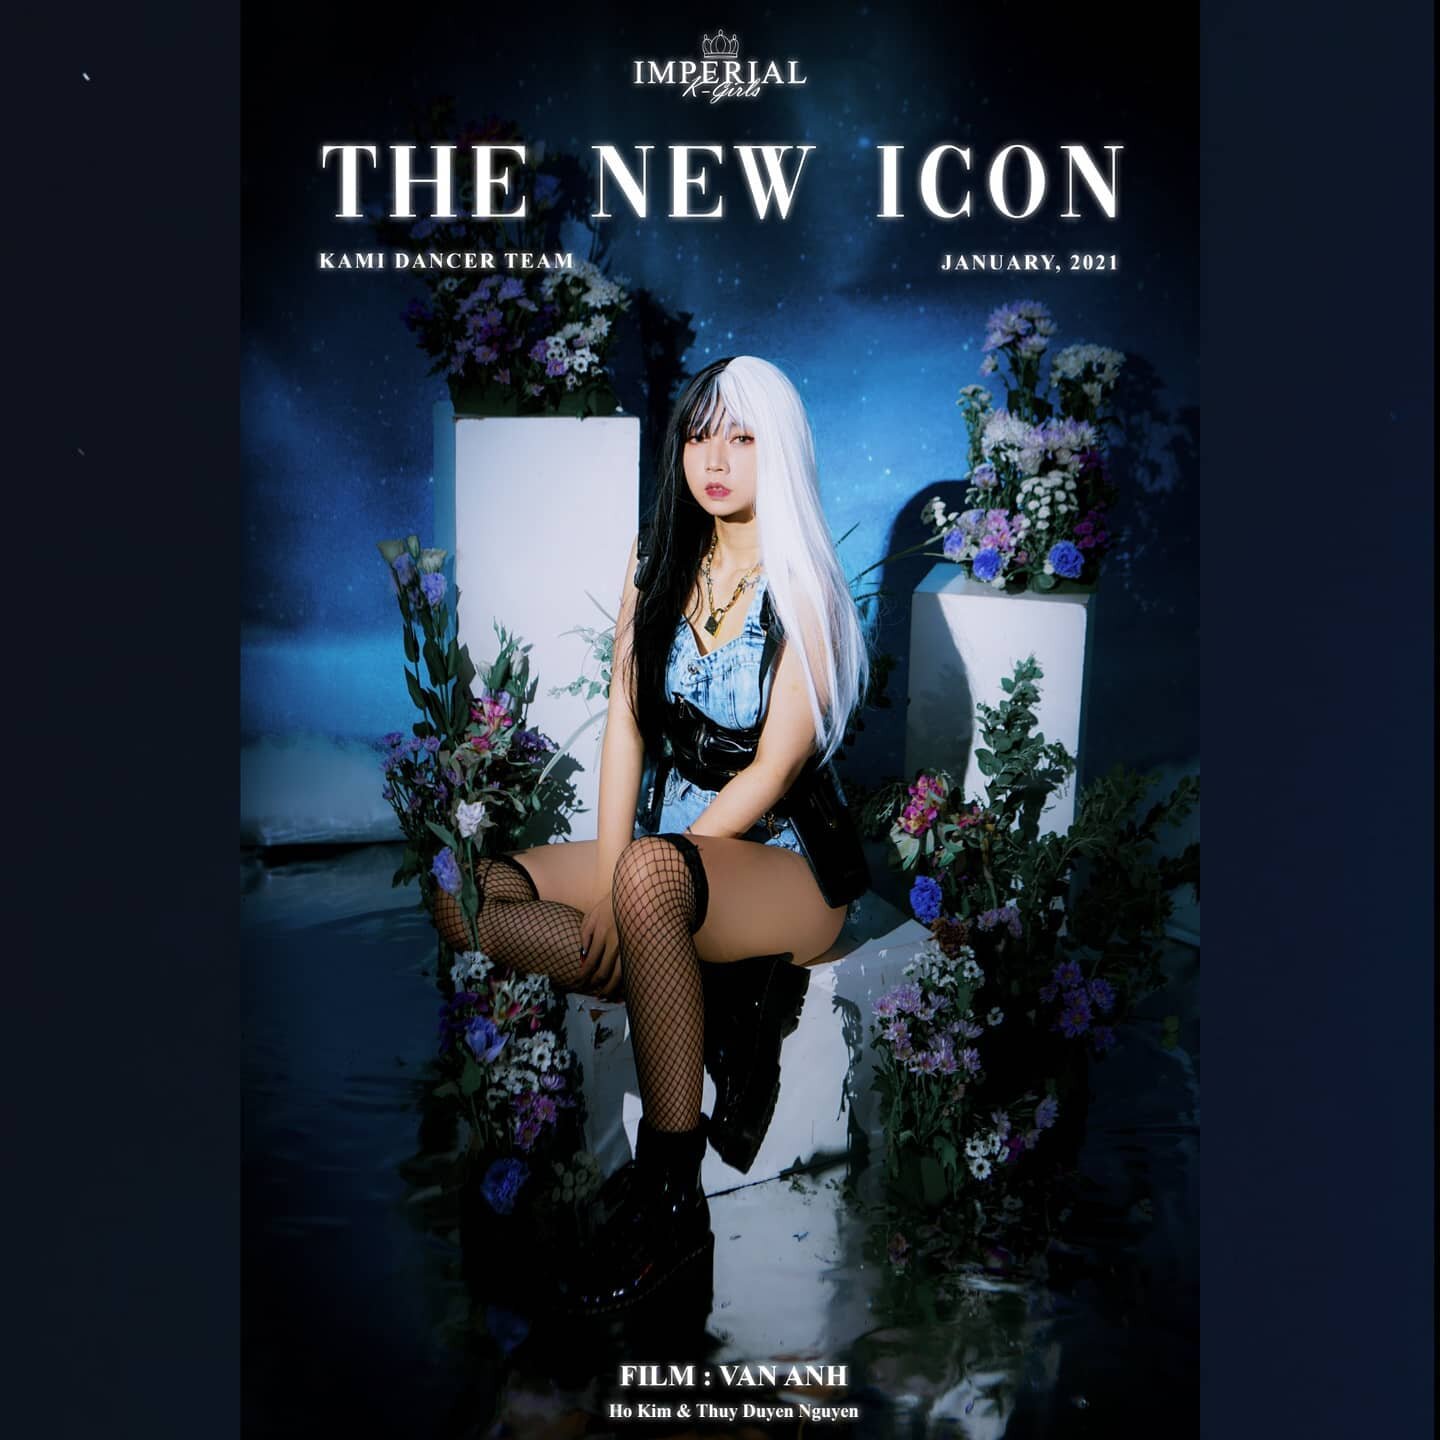 The New Icon : @reveuseamedealice
Feat. Imperial K-Girls
by @by.hokim &amp; @thelookbookedition
.
#KTeam #KGirls #Kboys #ImperialKGirls
#hcmc #dancer #illusionstudio 
.
❤&nbsp; 𝗖𝗼𝗻𝘁𝗮𝗰𝘁 𝗳𝗼𝗿 𝘄𝗼𝗿𝗸
𝗛𝗢𝗧𝗟𝗜𝗡𝗘 : 𝘮𝘴. 𝘒𝘢𝘮𝘪 0931 421 4